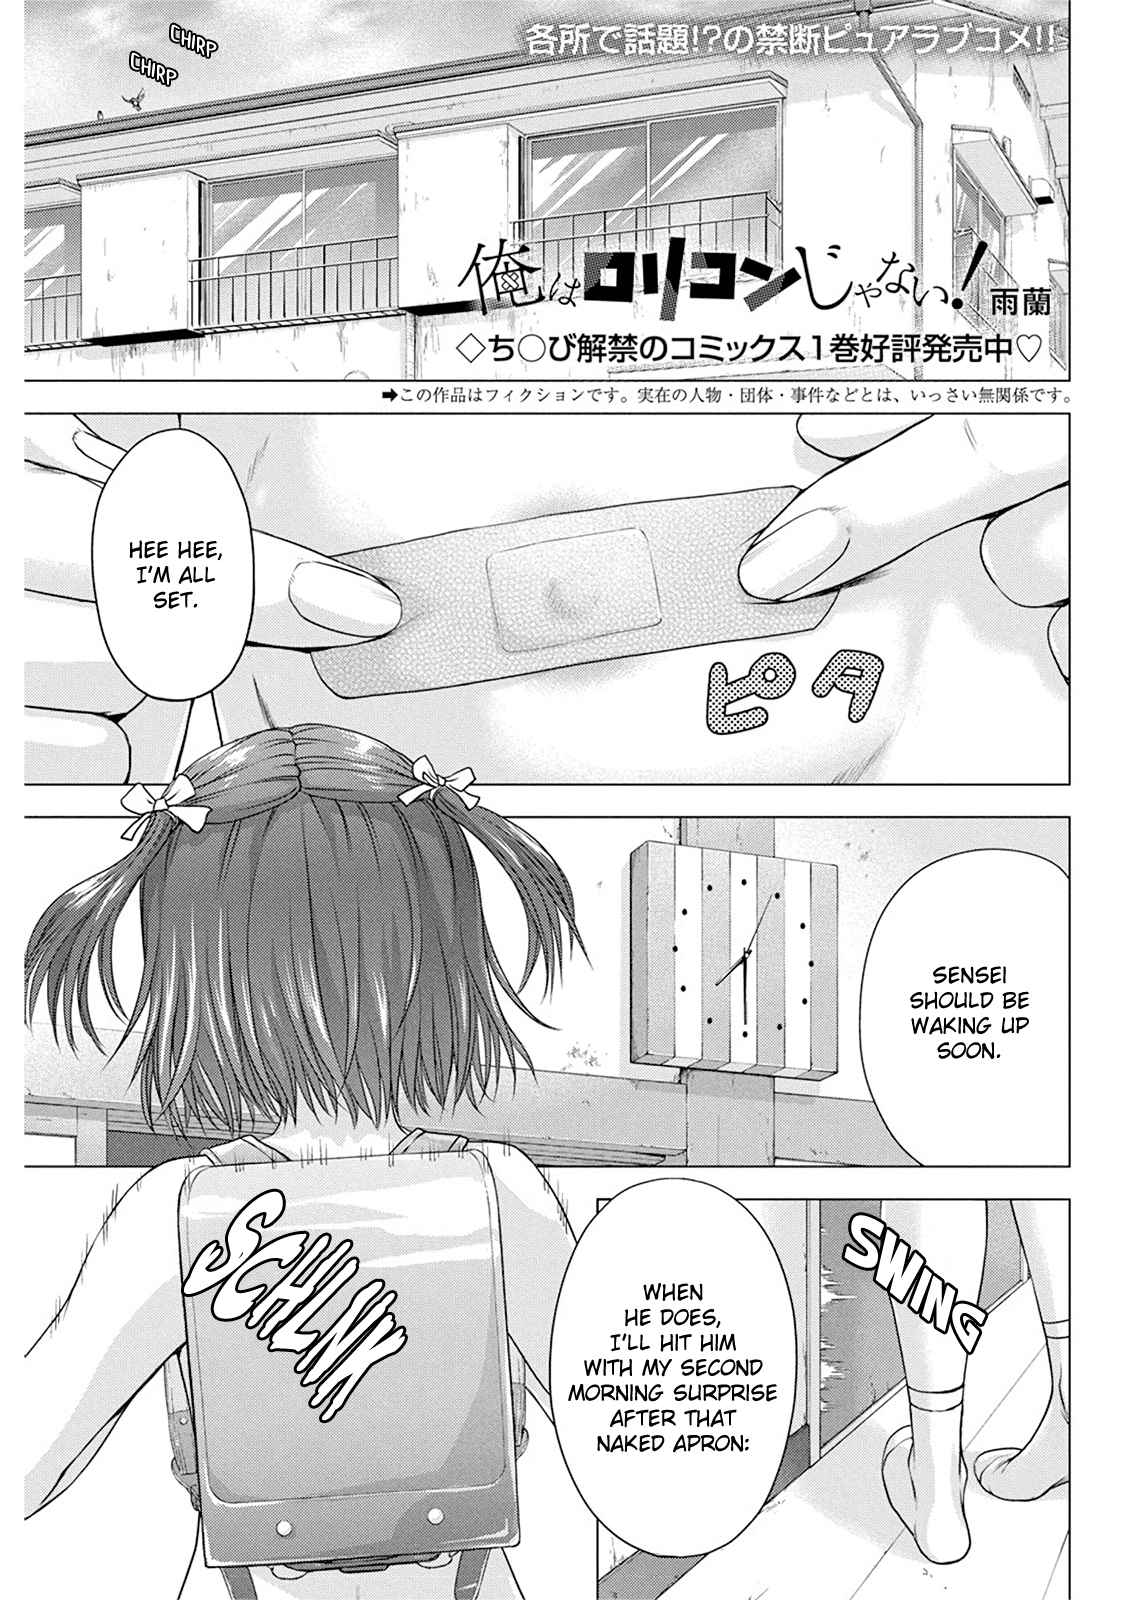 I'm Not a Lolicon! Vol. 2 Ch. 14 Pay Attention To Me!